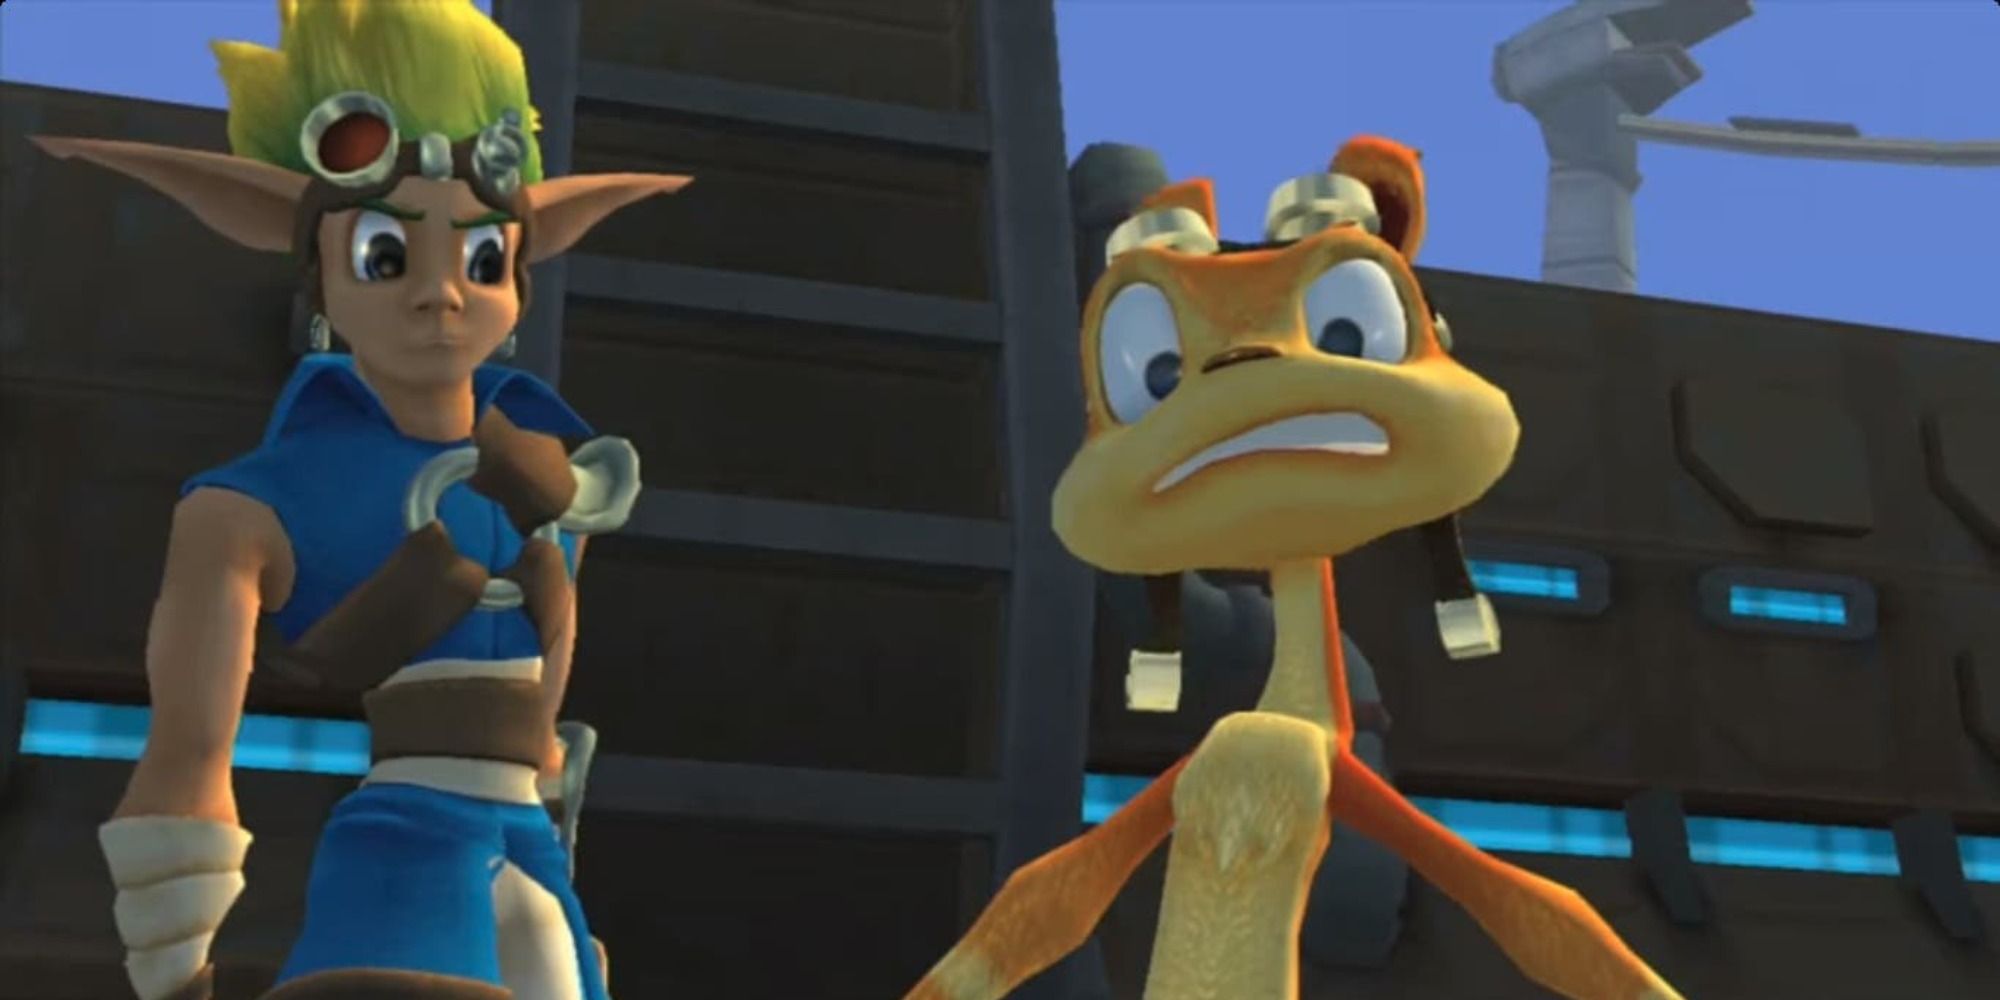 Jak & Daxter, Daxter front and center with Jak behind to the left looking judgy